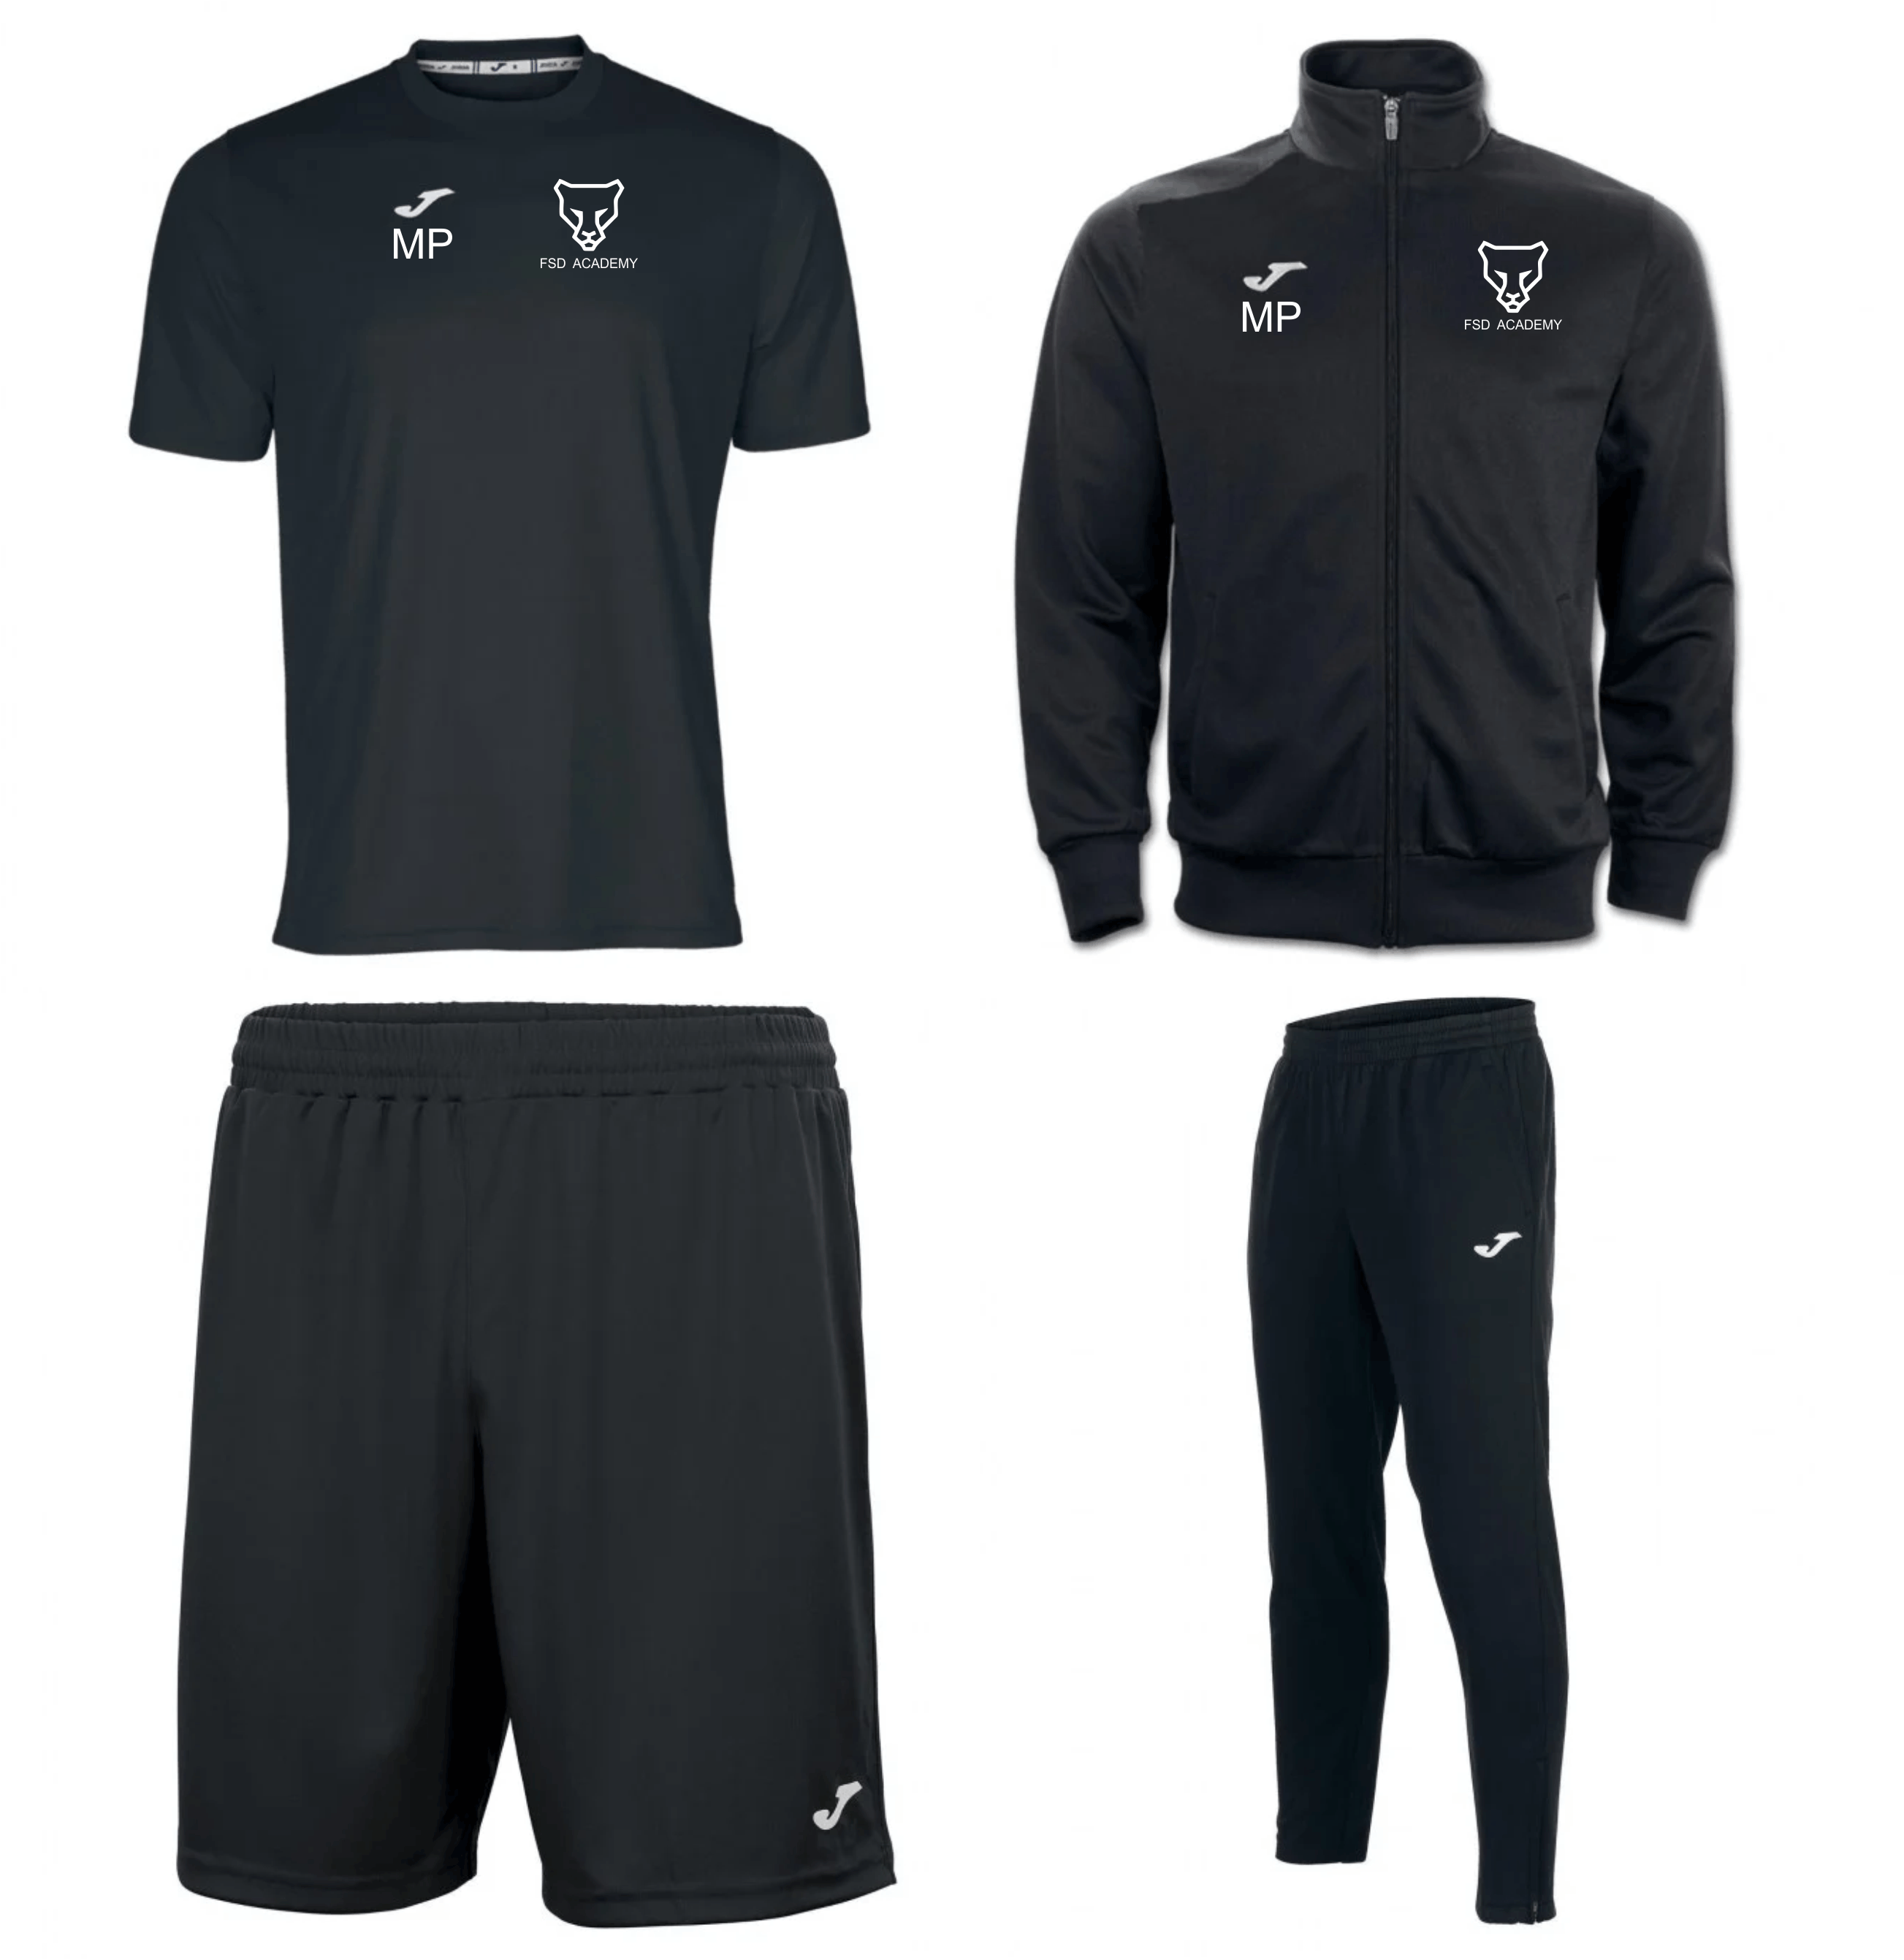 FSD Academy 2022/23 collection 1. (£35 deposit now, £30 payment later